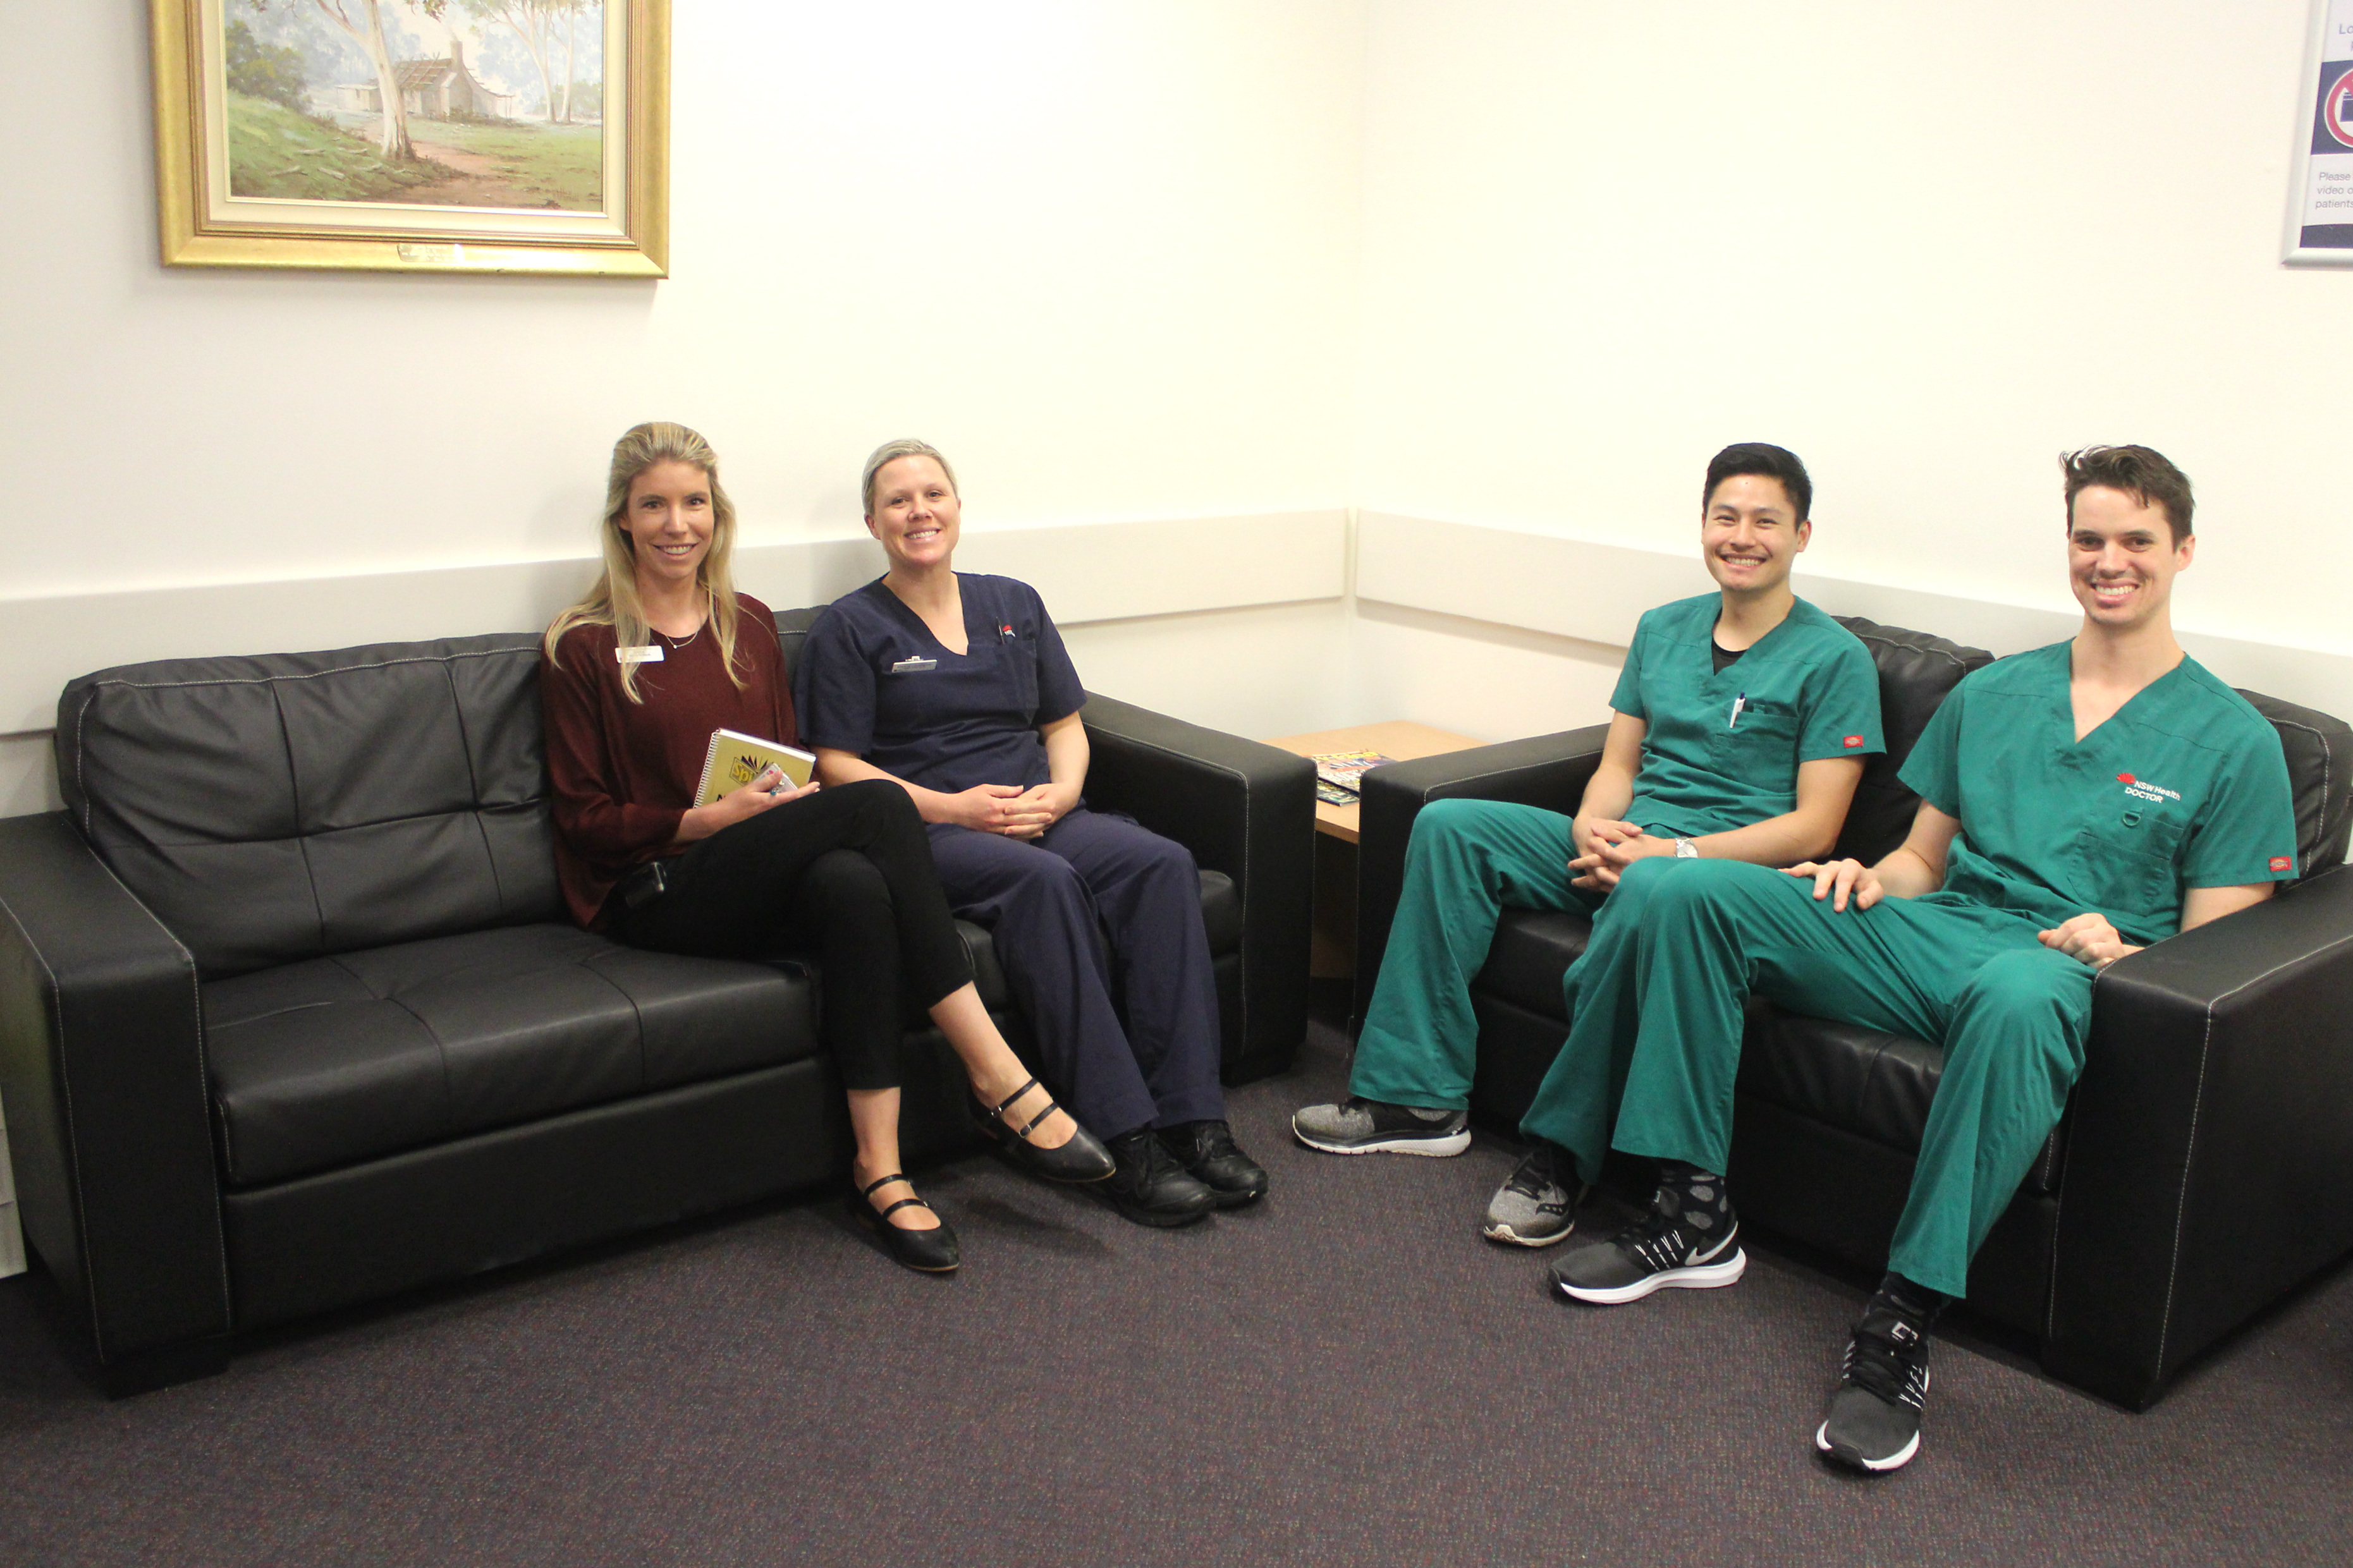 Nurses from the Intensive Care Unit sitting on the couches smiling 